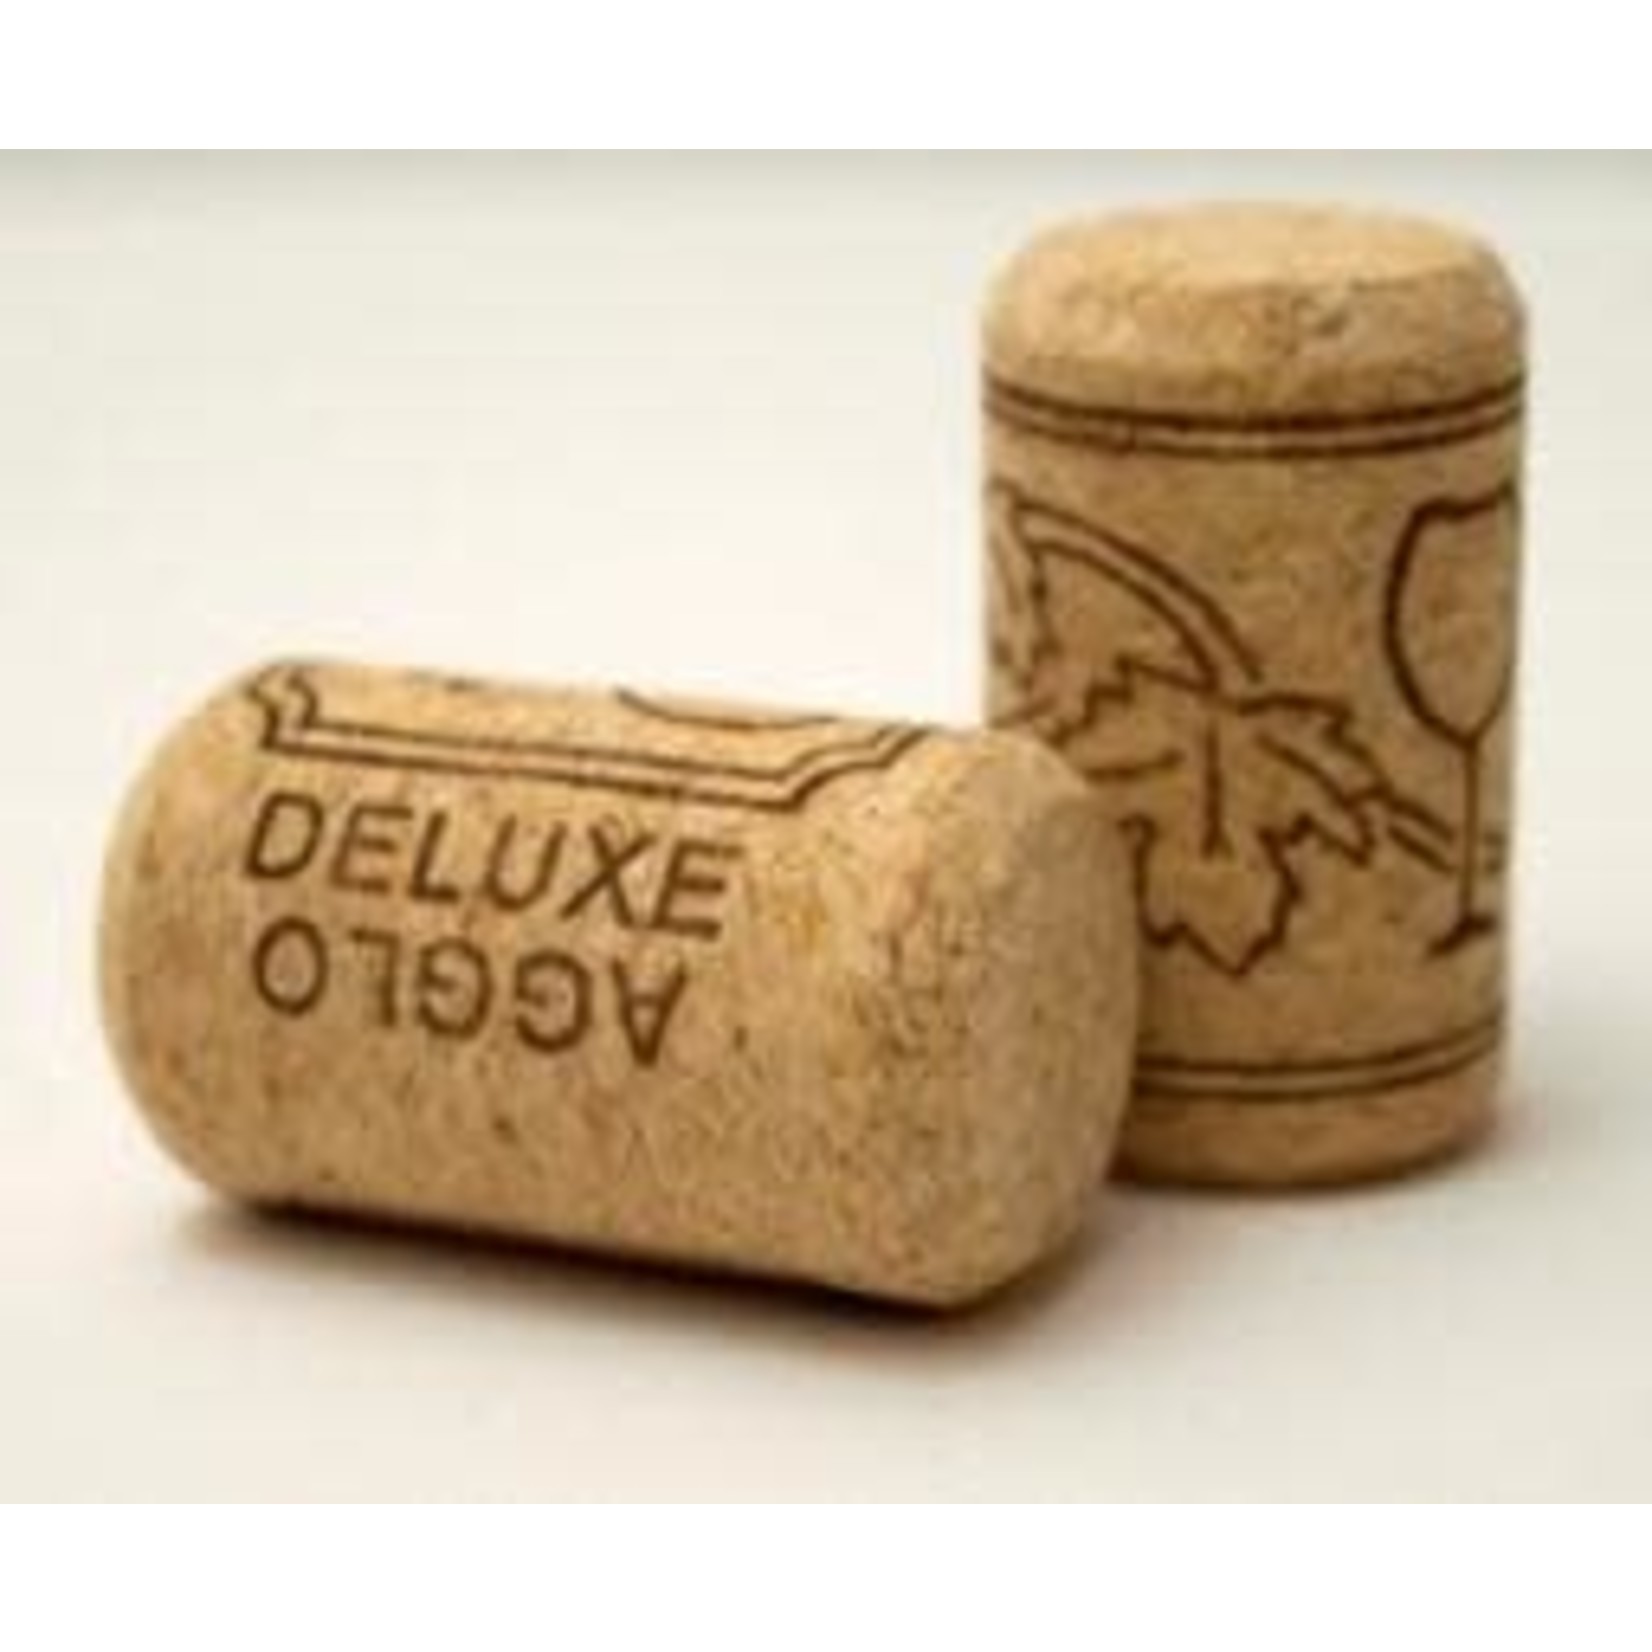 Deluxe Agglomerated Wine Corks 38 x 22mm 30ct.